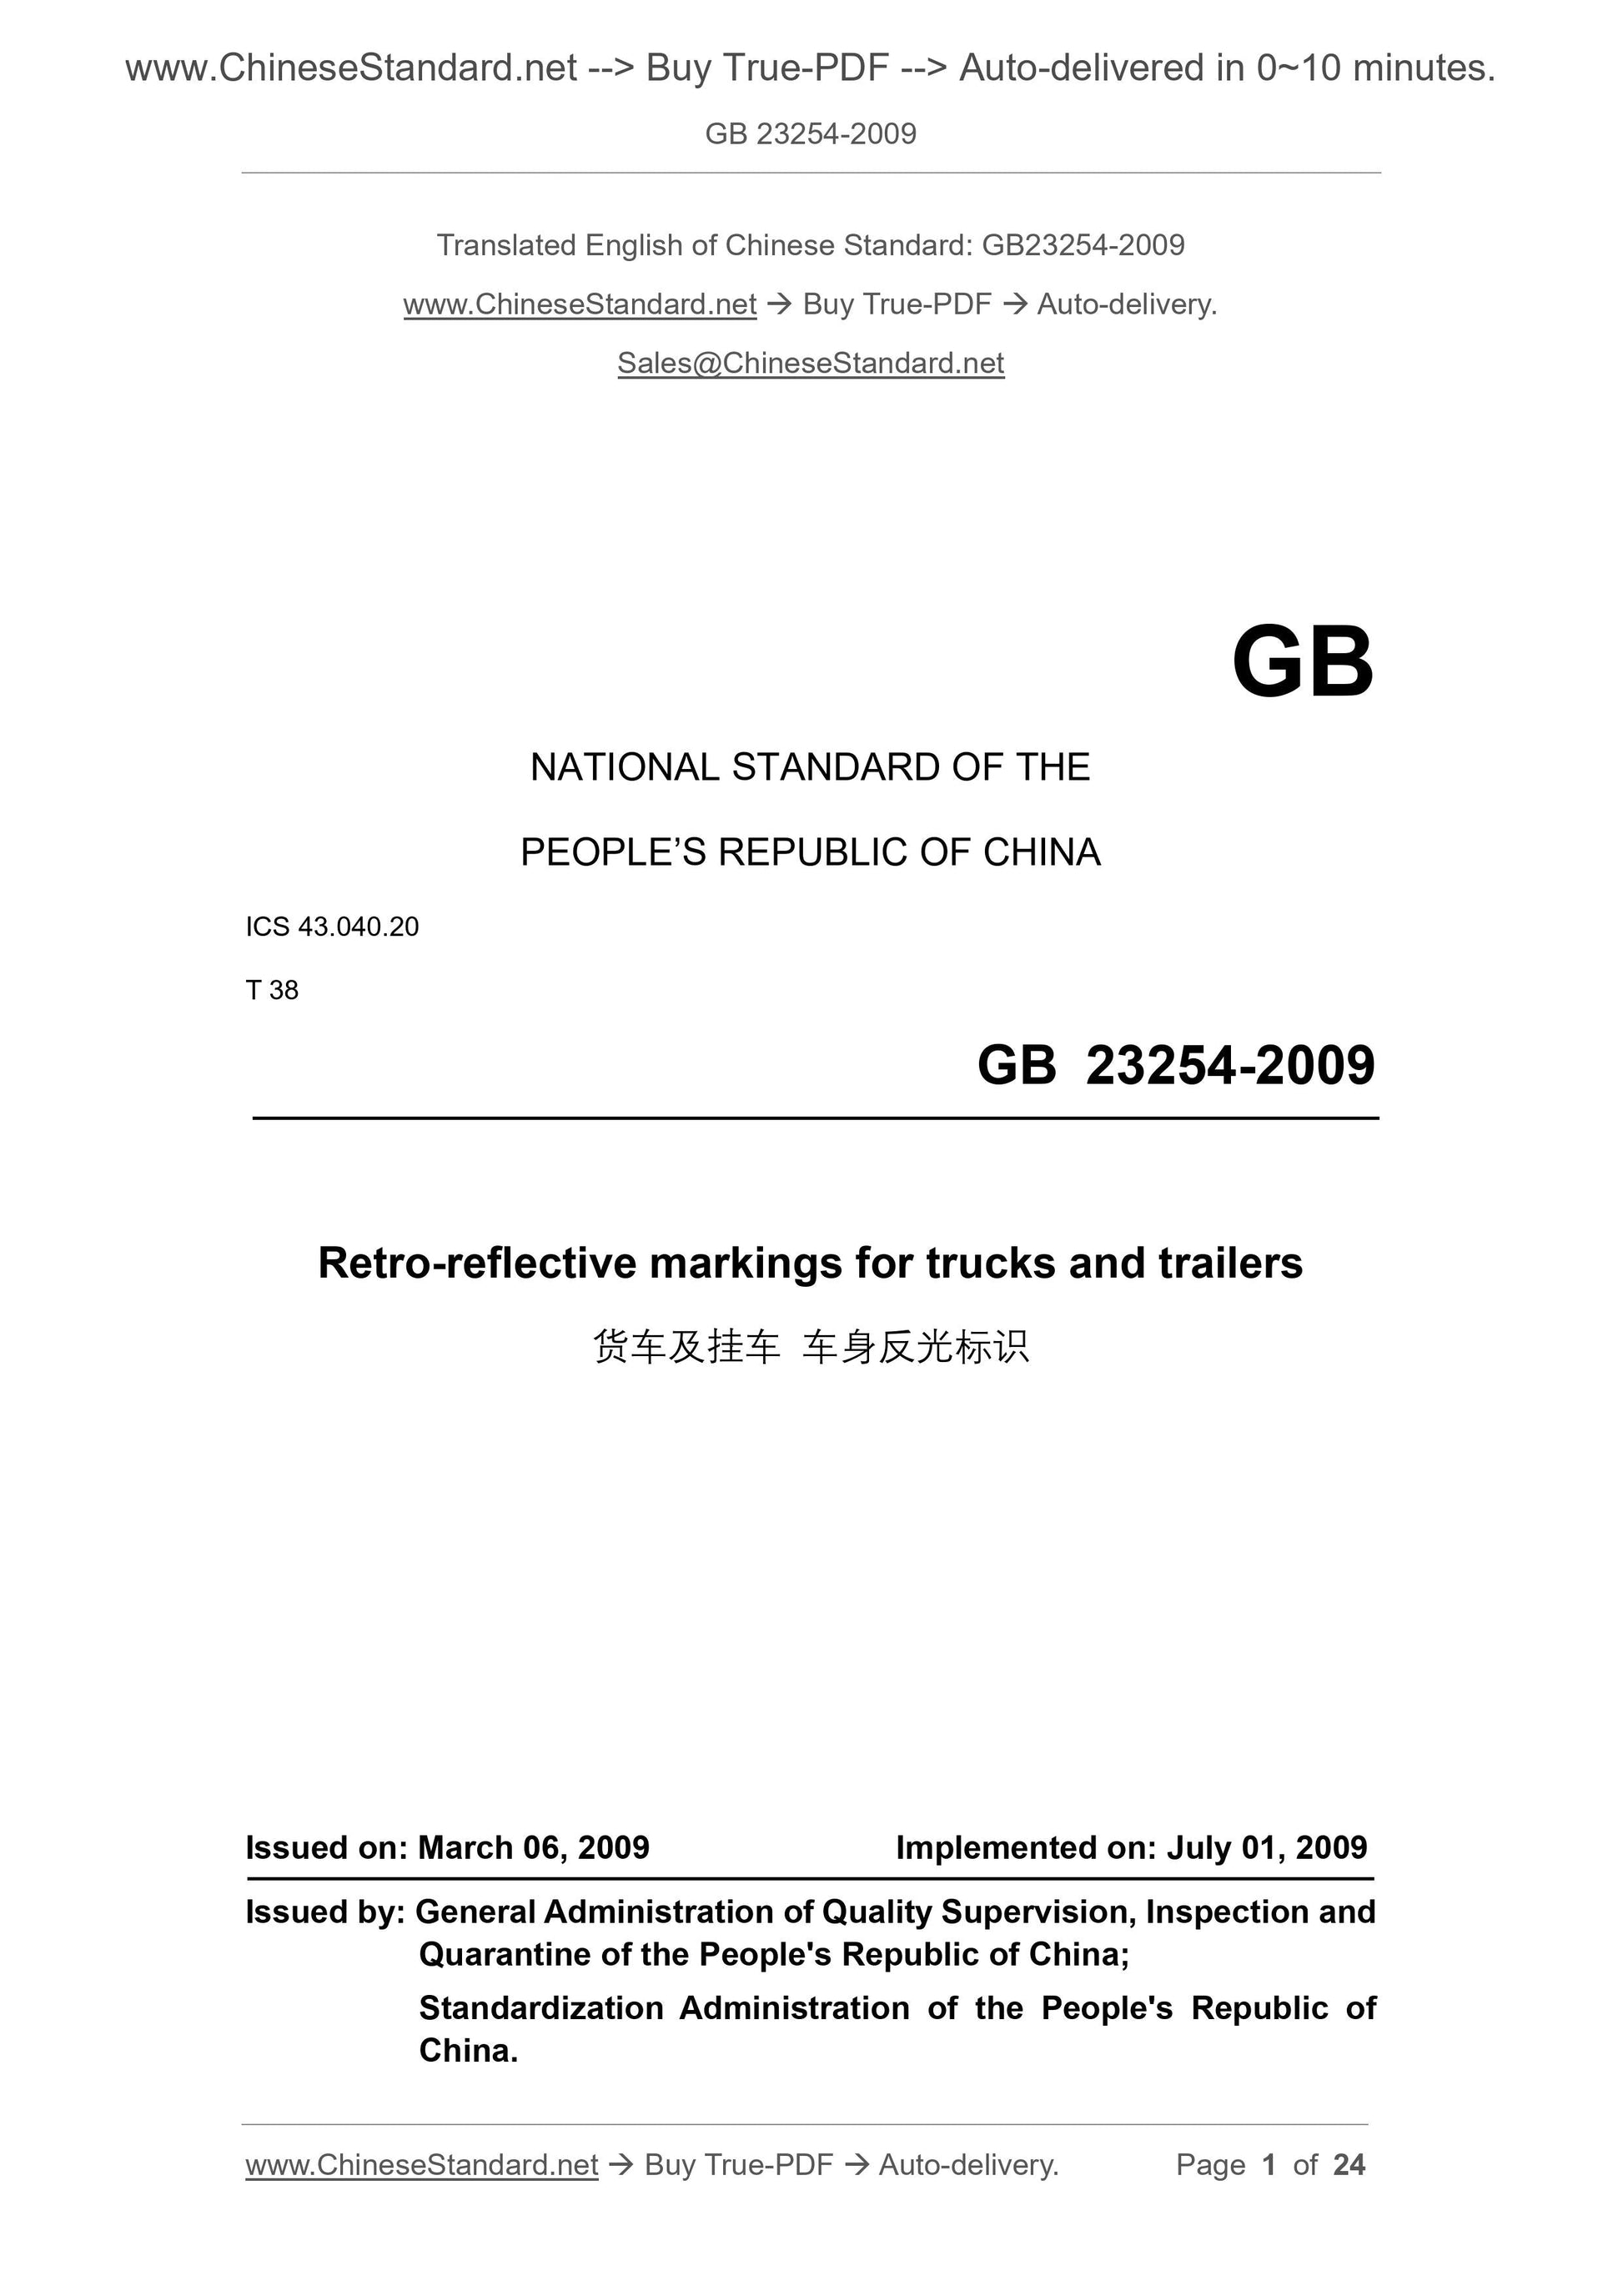 GB 23254-2009 Page 1